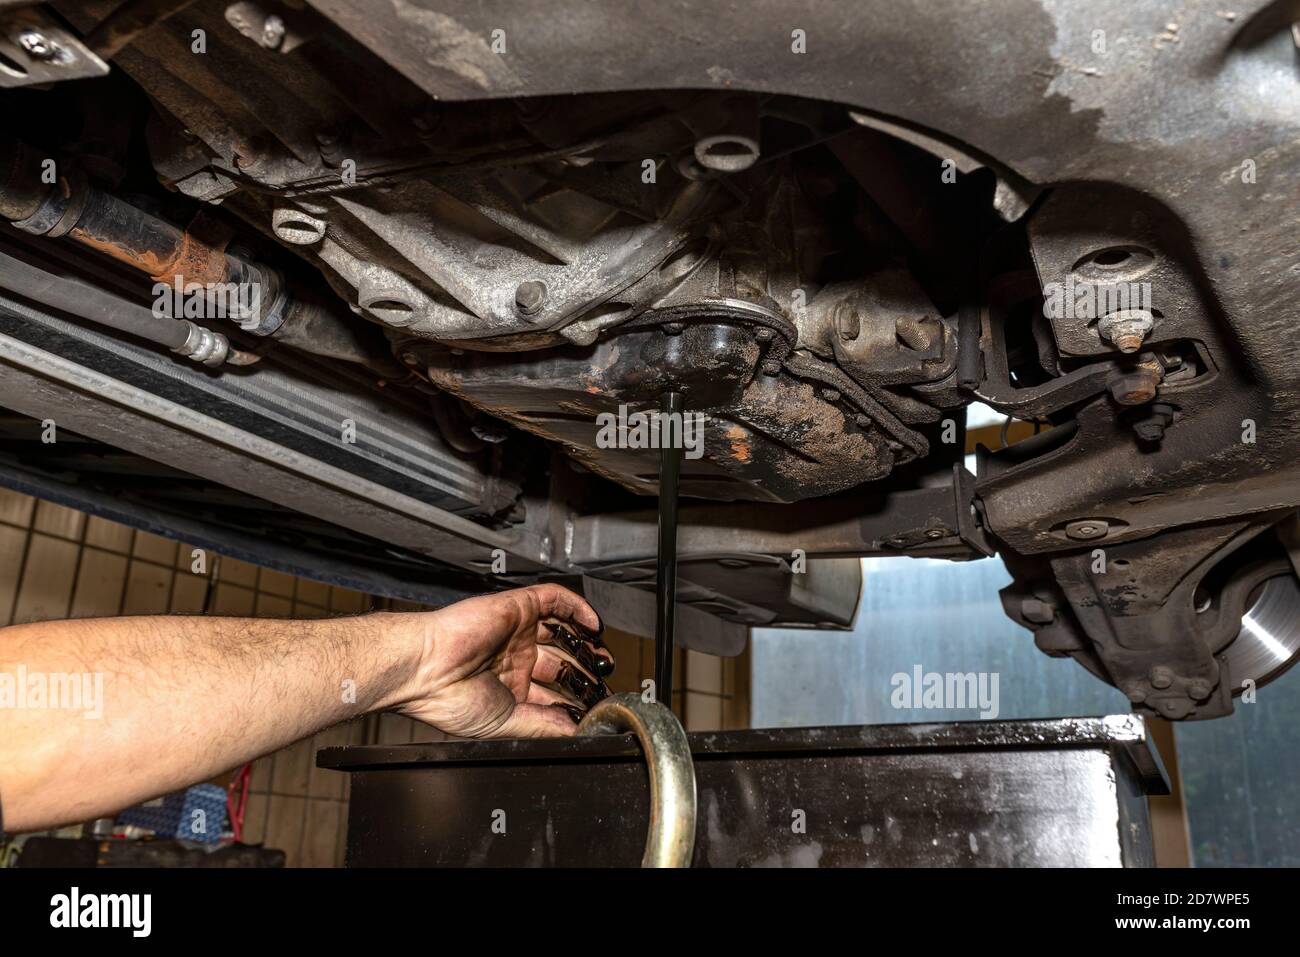 Draining used diesel engine oil from an oil pan into a metal container in a car workshop, visible dirty hands of a mechanic. Stock Photo